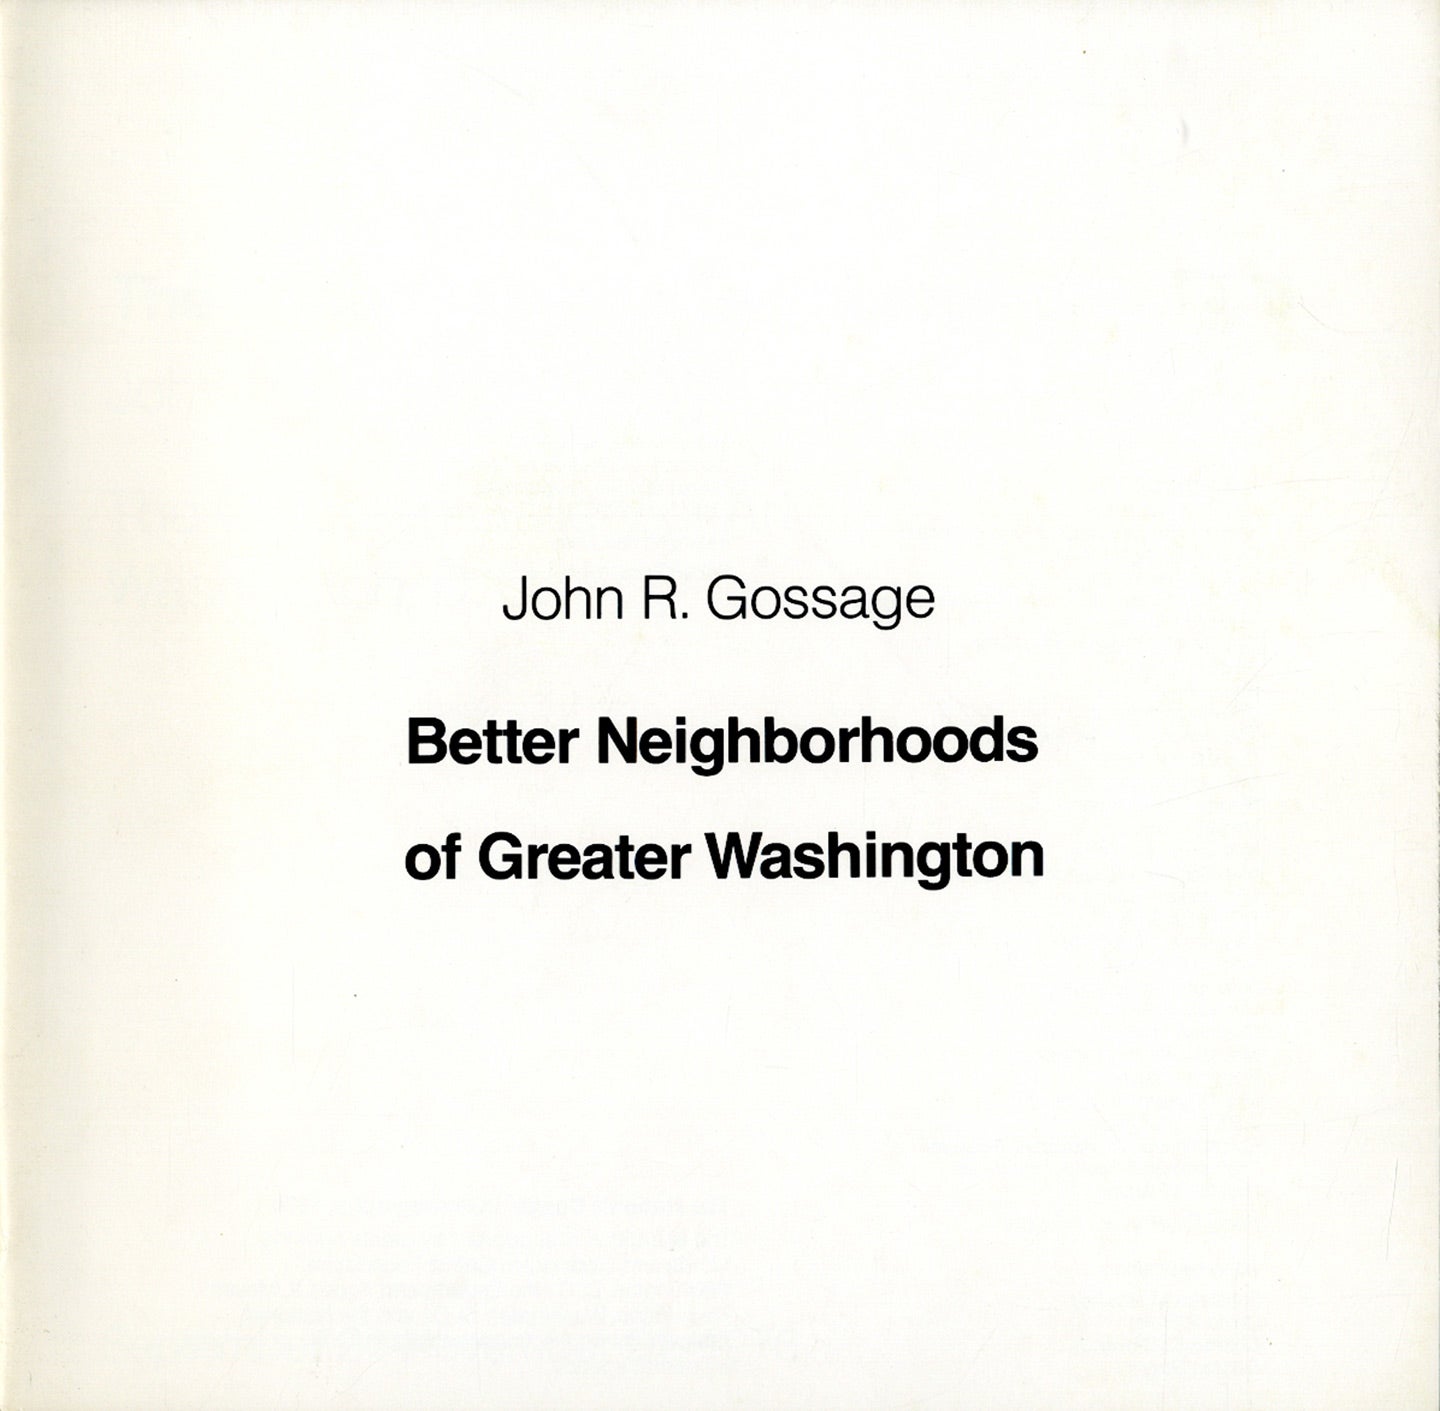 Photography at the Corcoran Series, The Nation's Capital in Photographs, 1976: John R. Gossage: Better Neighborhoods of Greater Washington